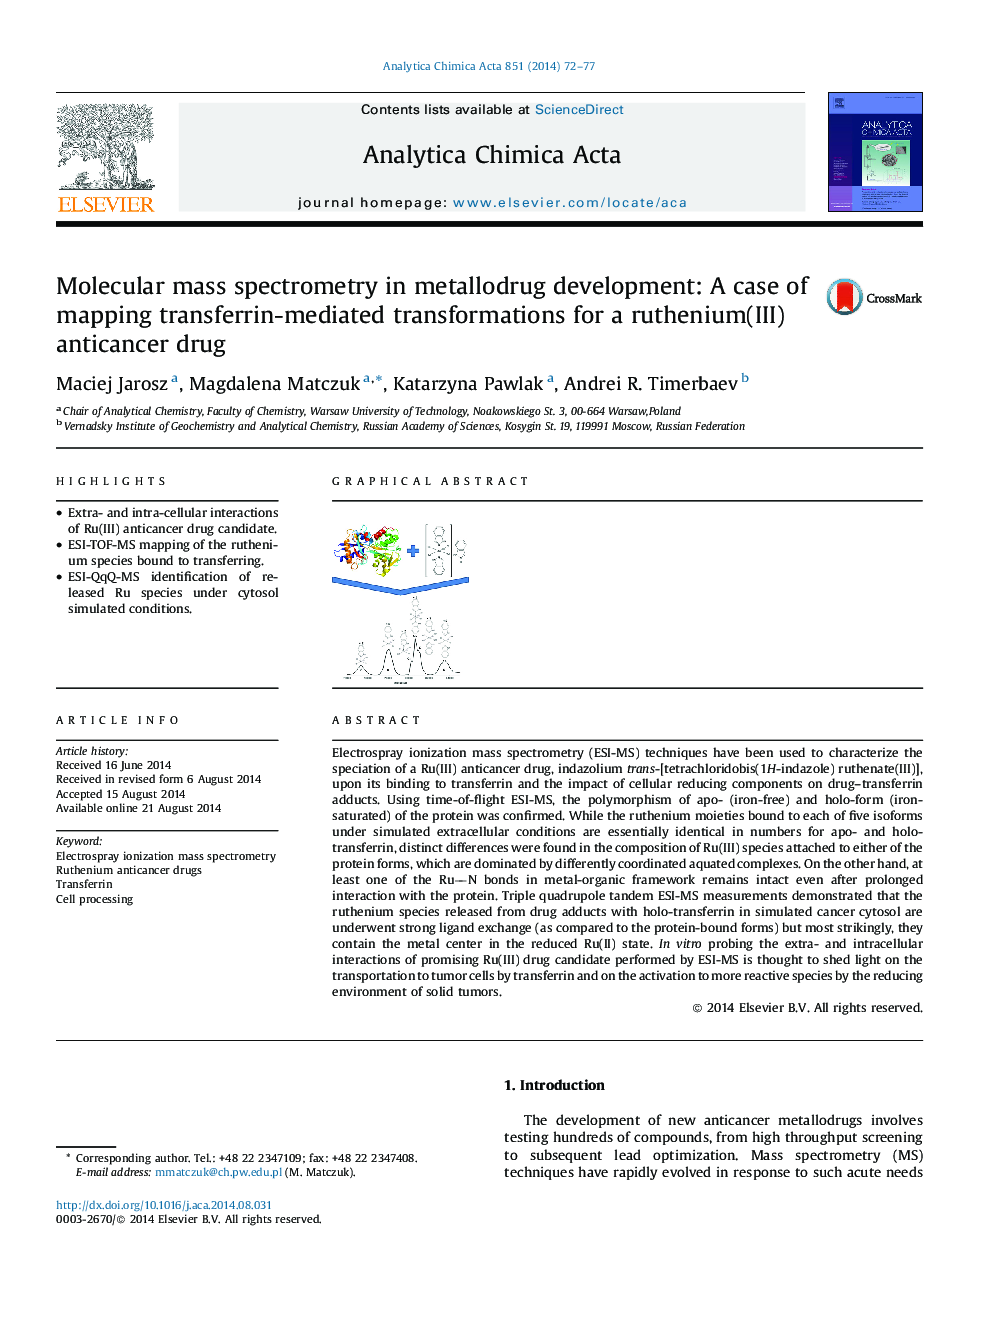 Molecular mass spectrometry in metallodrug development: A case of mapping transferrin-mediated transformations for a ruthenium(III) anticancer drug